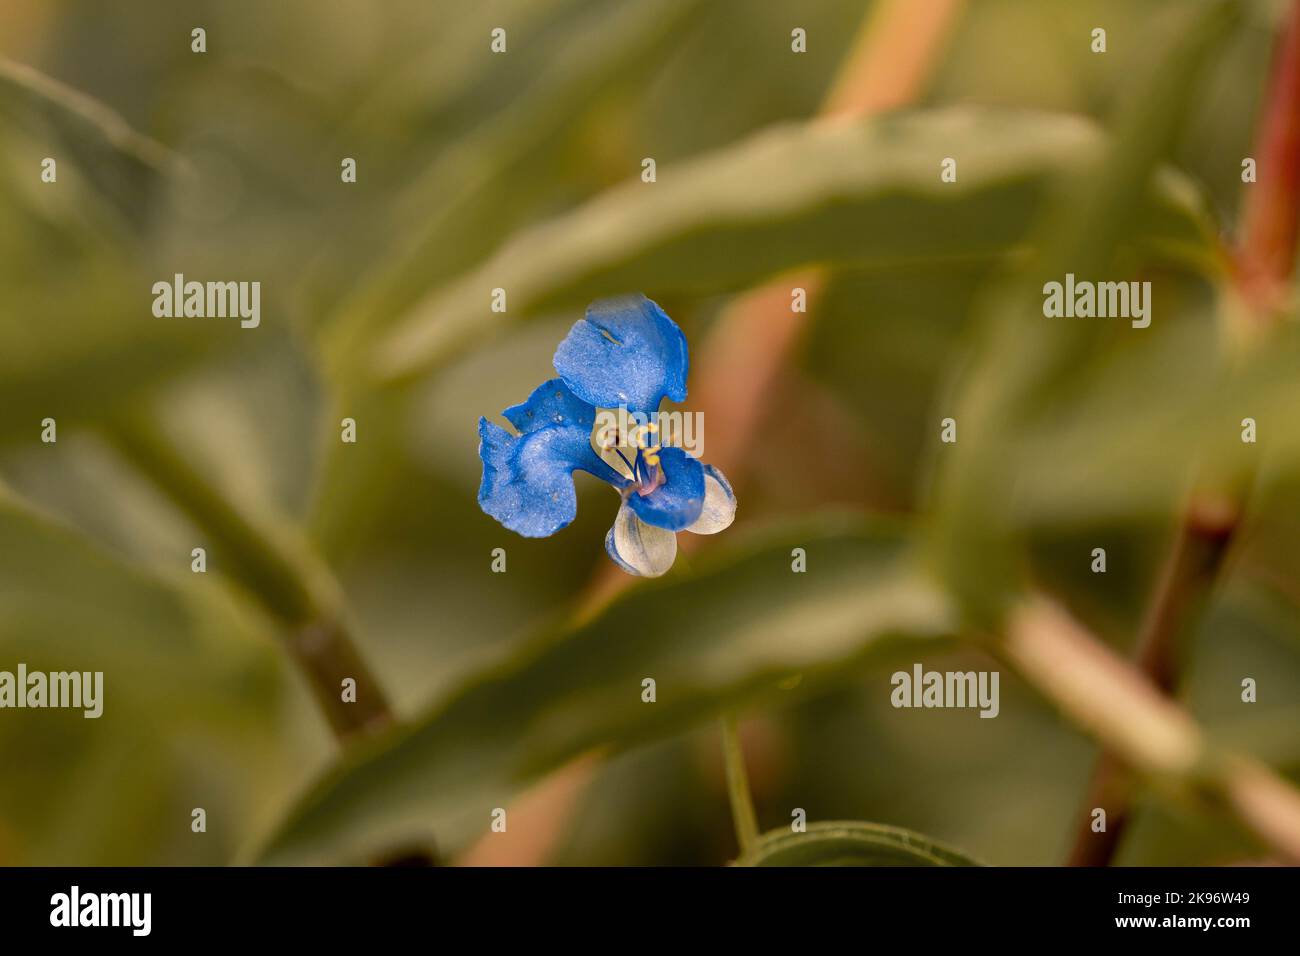 A closeup of a blue Commelina flower in a garden Stock Photo